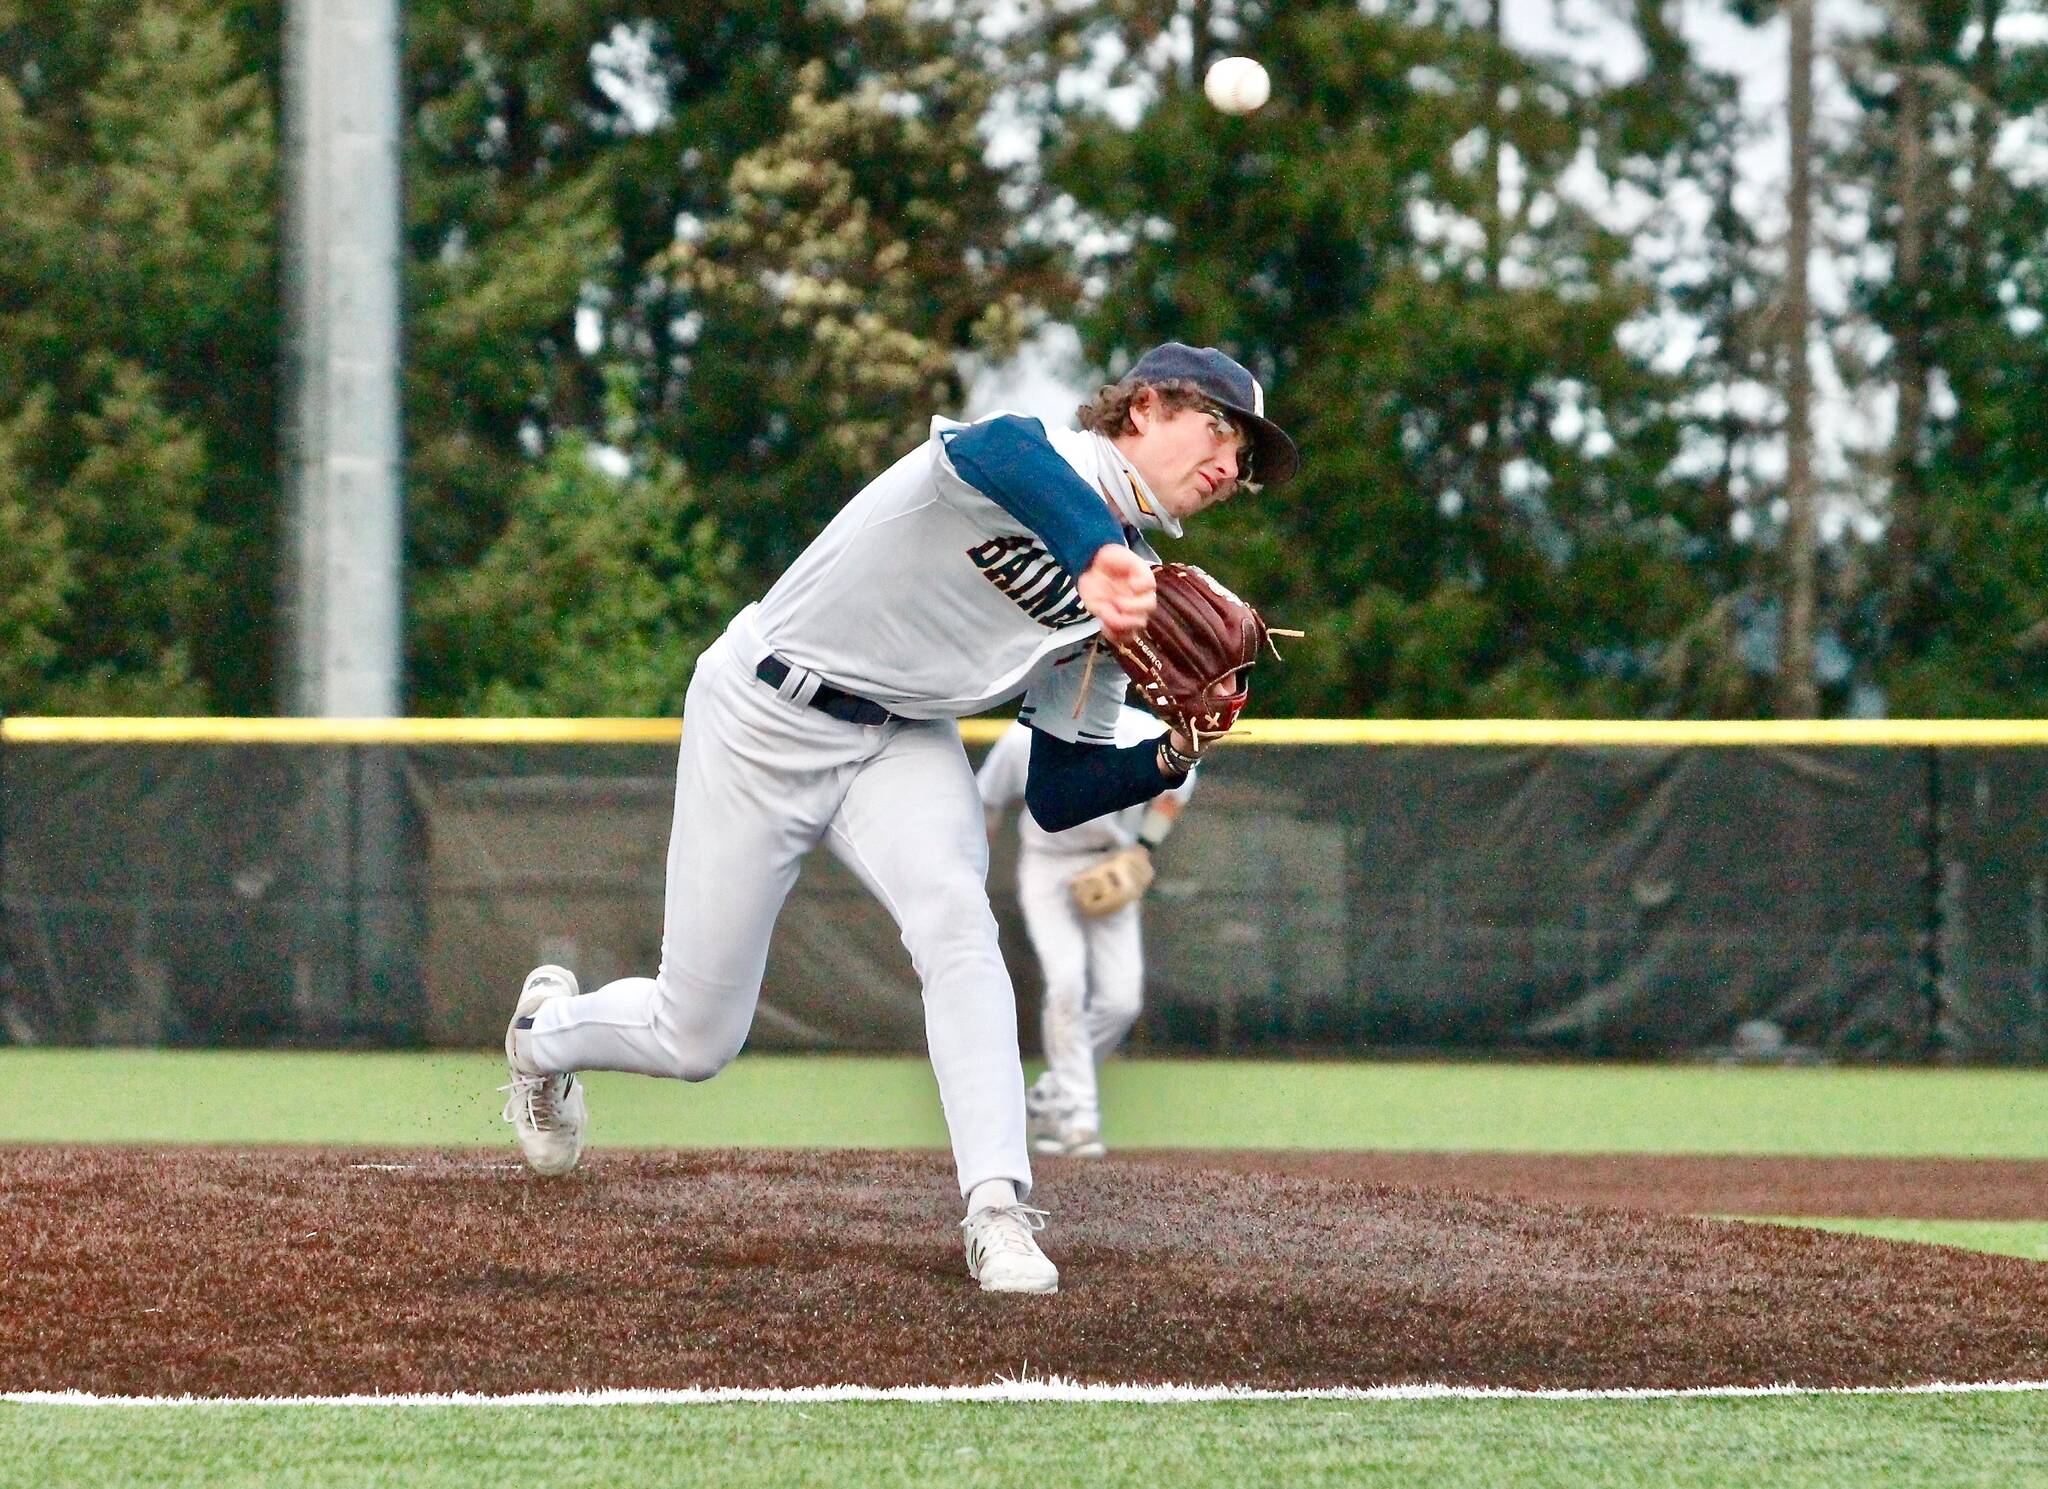 Bainbridge pitcher JR Ritchie dominated against Central Kitsap in the 2021 Olympic League championship throwing a no-hitter and striking out 18. (File photo)